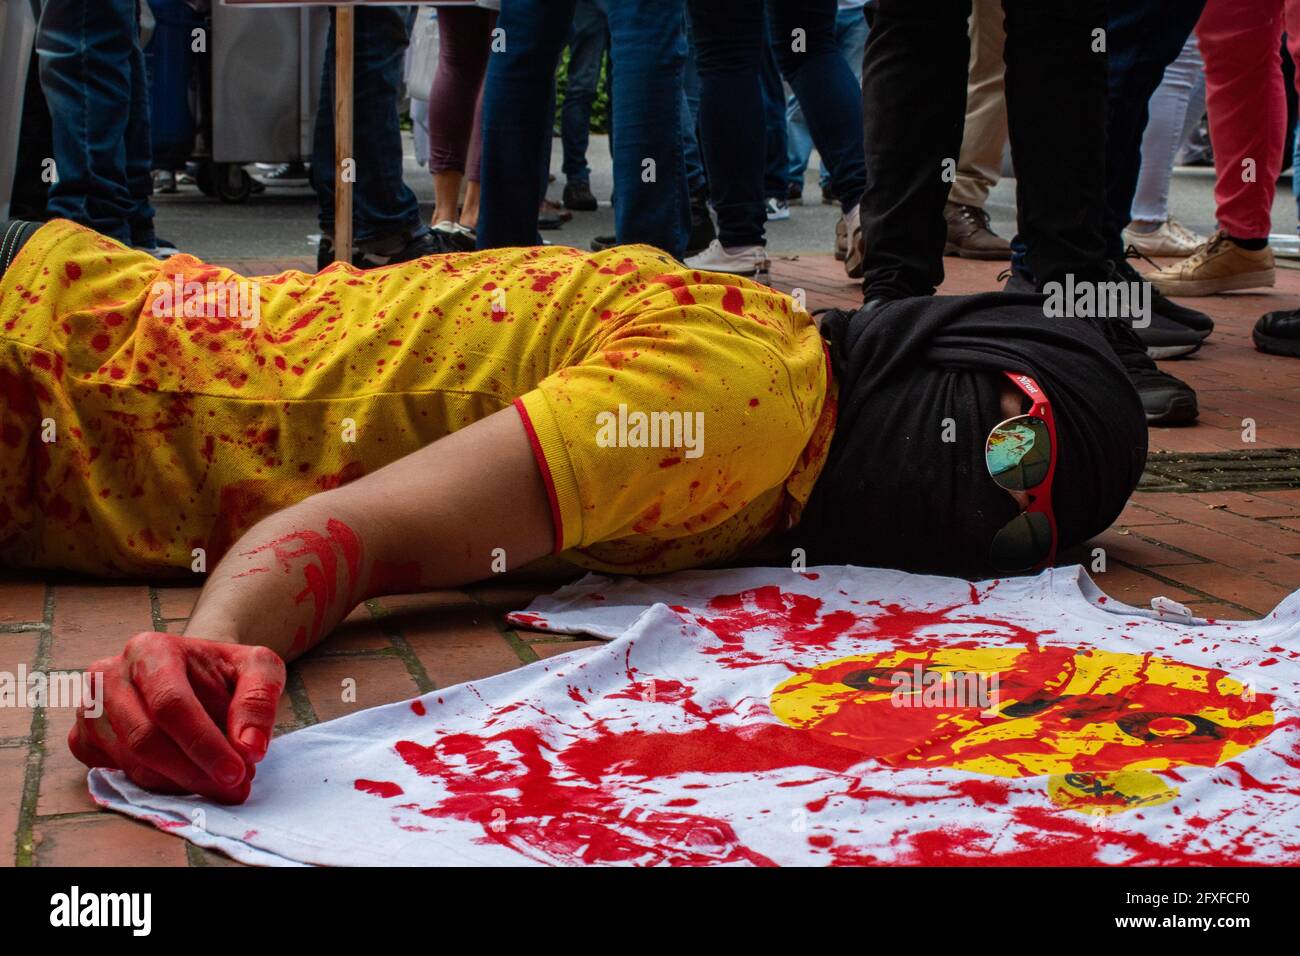 A demonstrator lies in the ground performing as it has been shot and wounded with a t-shirt of the Exito Supermarket stores as the supermarkets became focus on social media after videos showed that may have been used in torture cases involving police abuse of authority cases in a performing arts demonstration as artists and demonstrators protested against the government of president Ivan Duque Marquez and the abuse of force by police that leads to at least 40 dead across the country since the nation wide antigovernment protests started. In Medellin, Colombia on May 26, 2021. Stock Photo